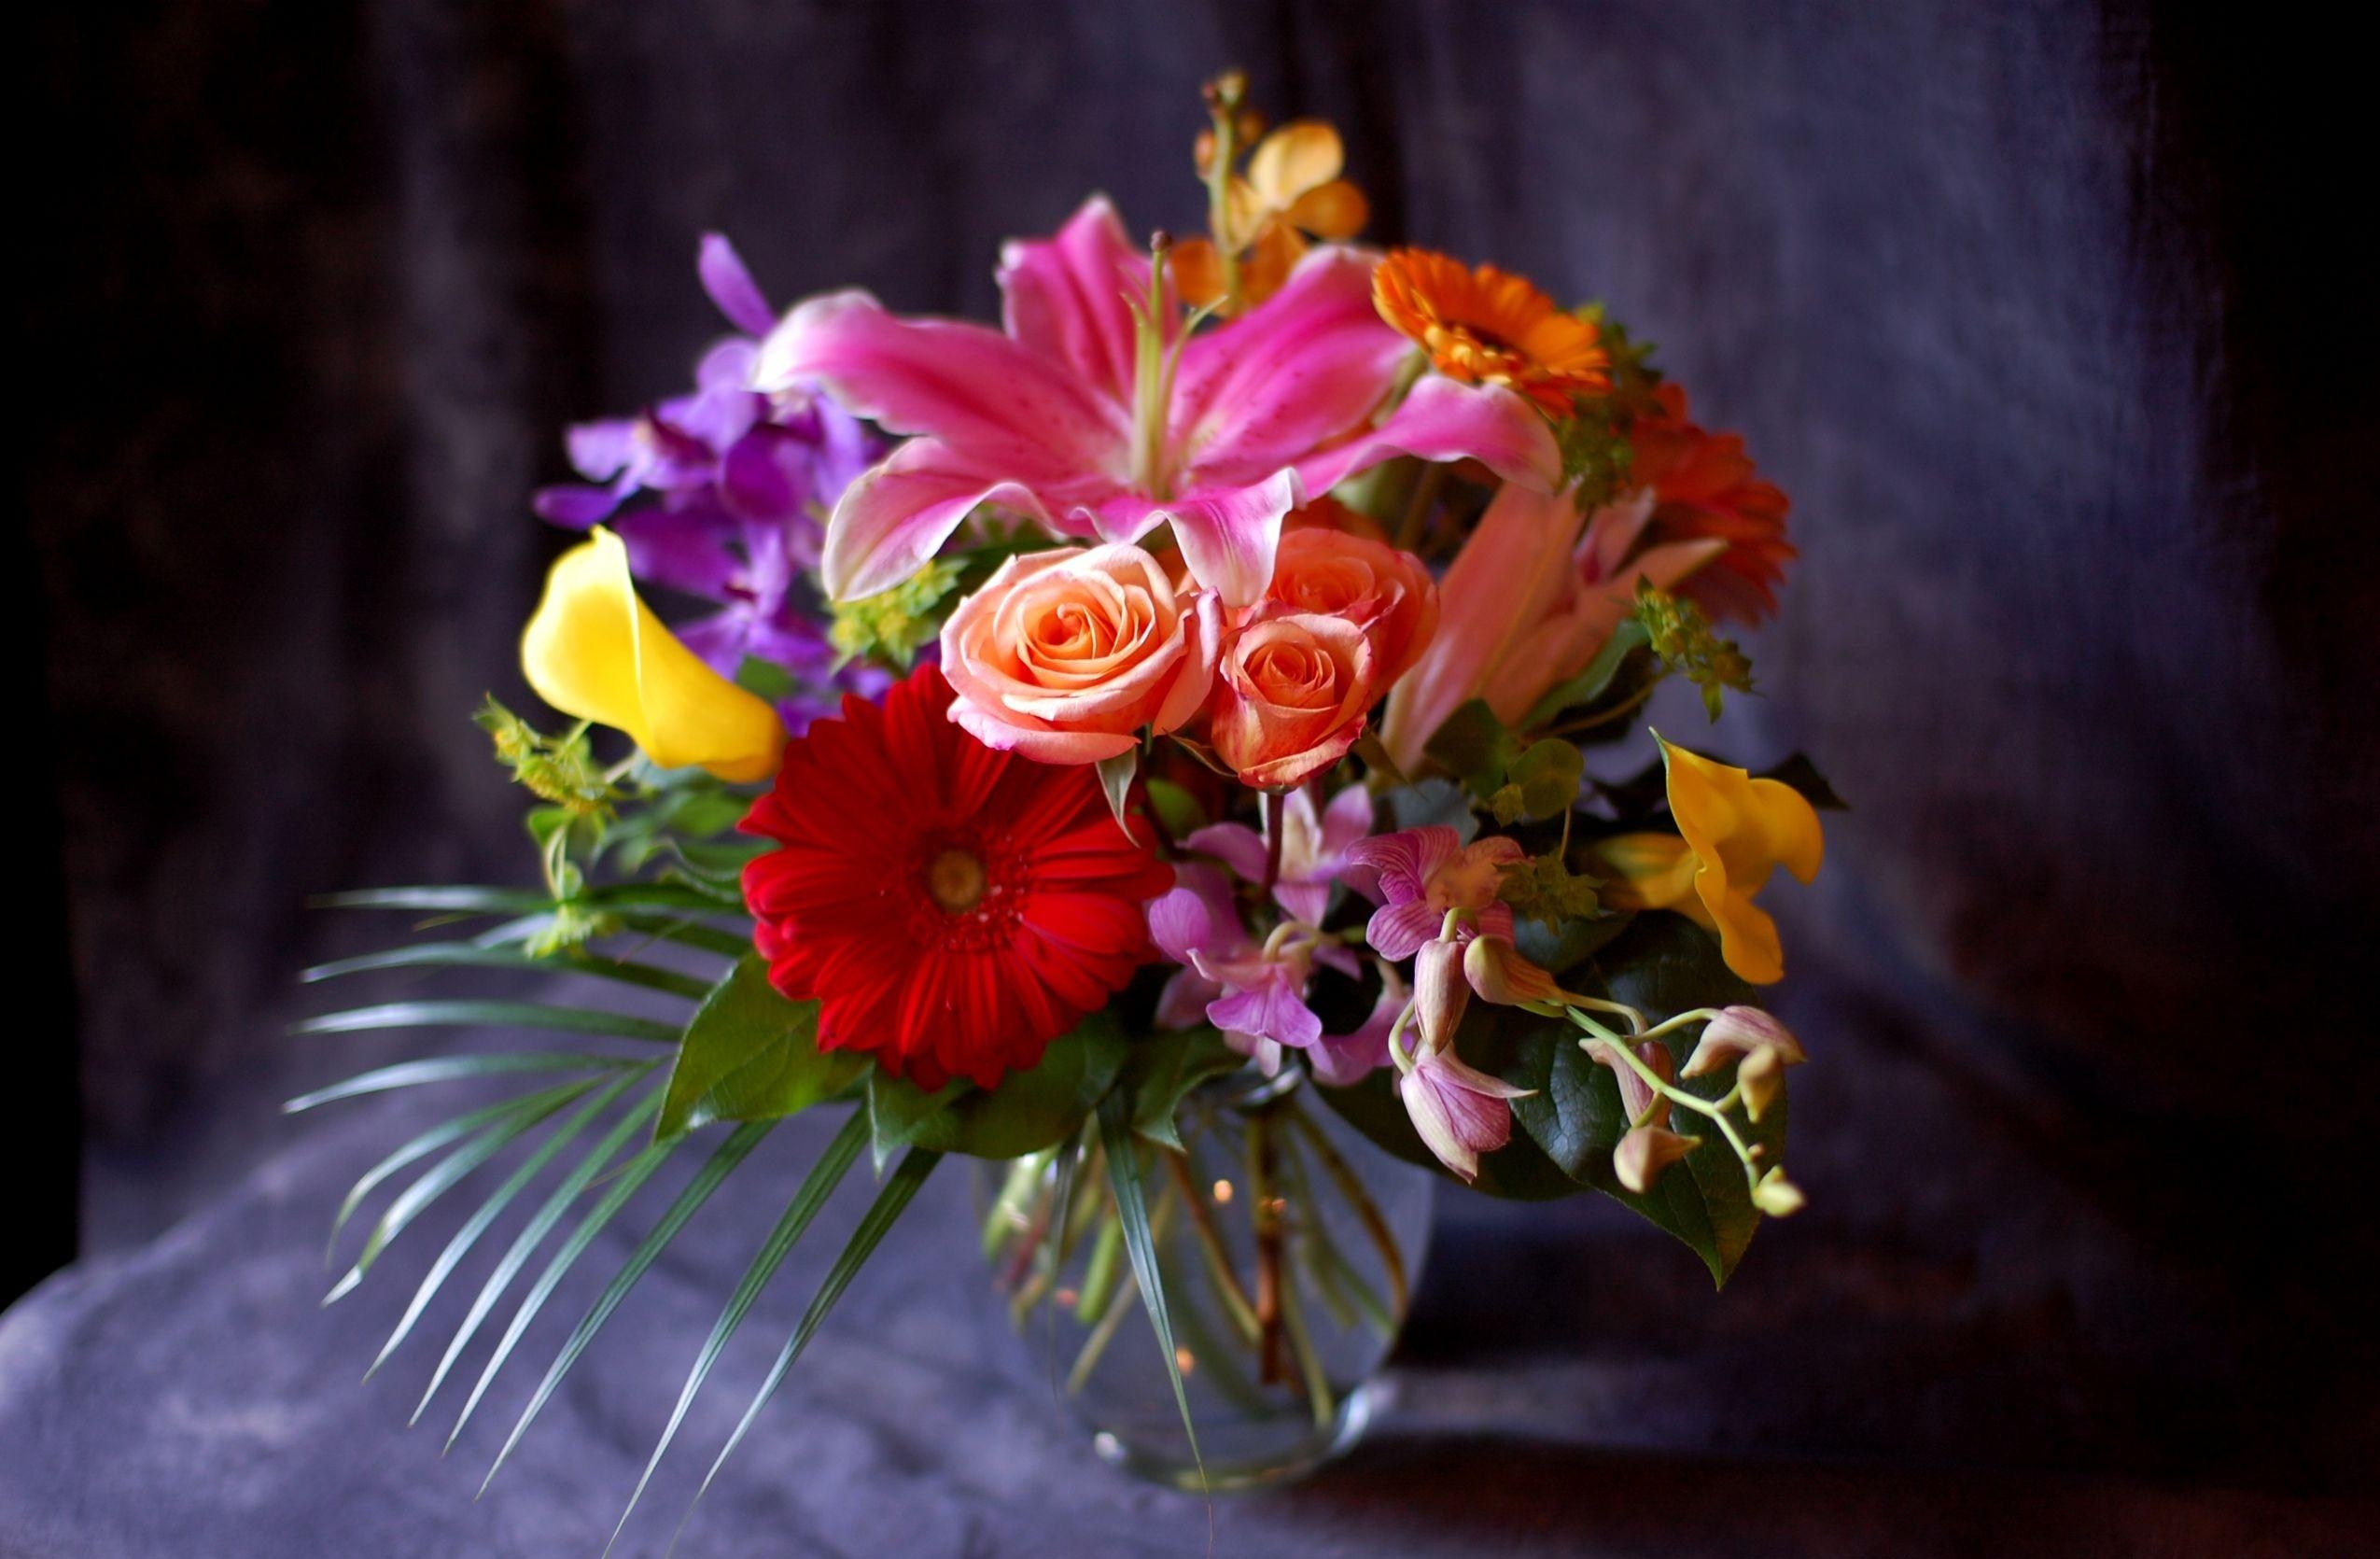 Free HD rose, composition, flowers, rose flower, bouquet, vase, calla, lily, callas, gerbera, orchid